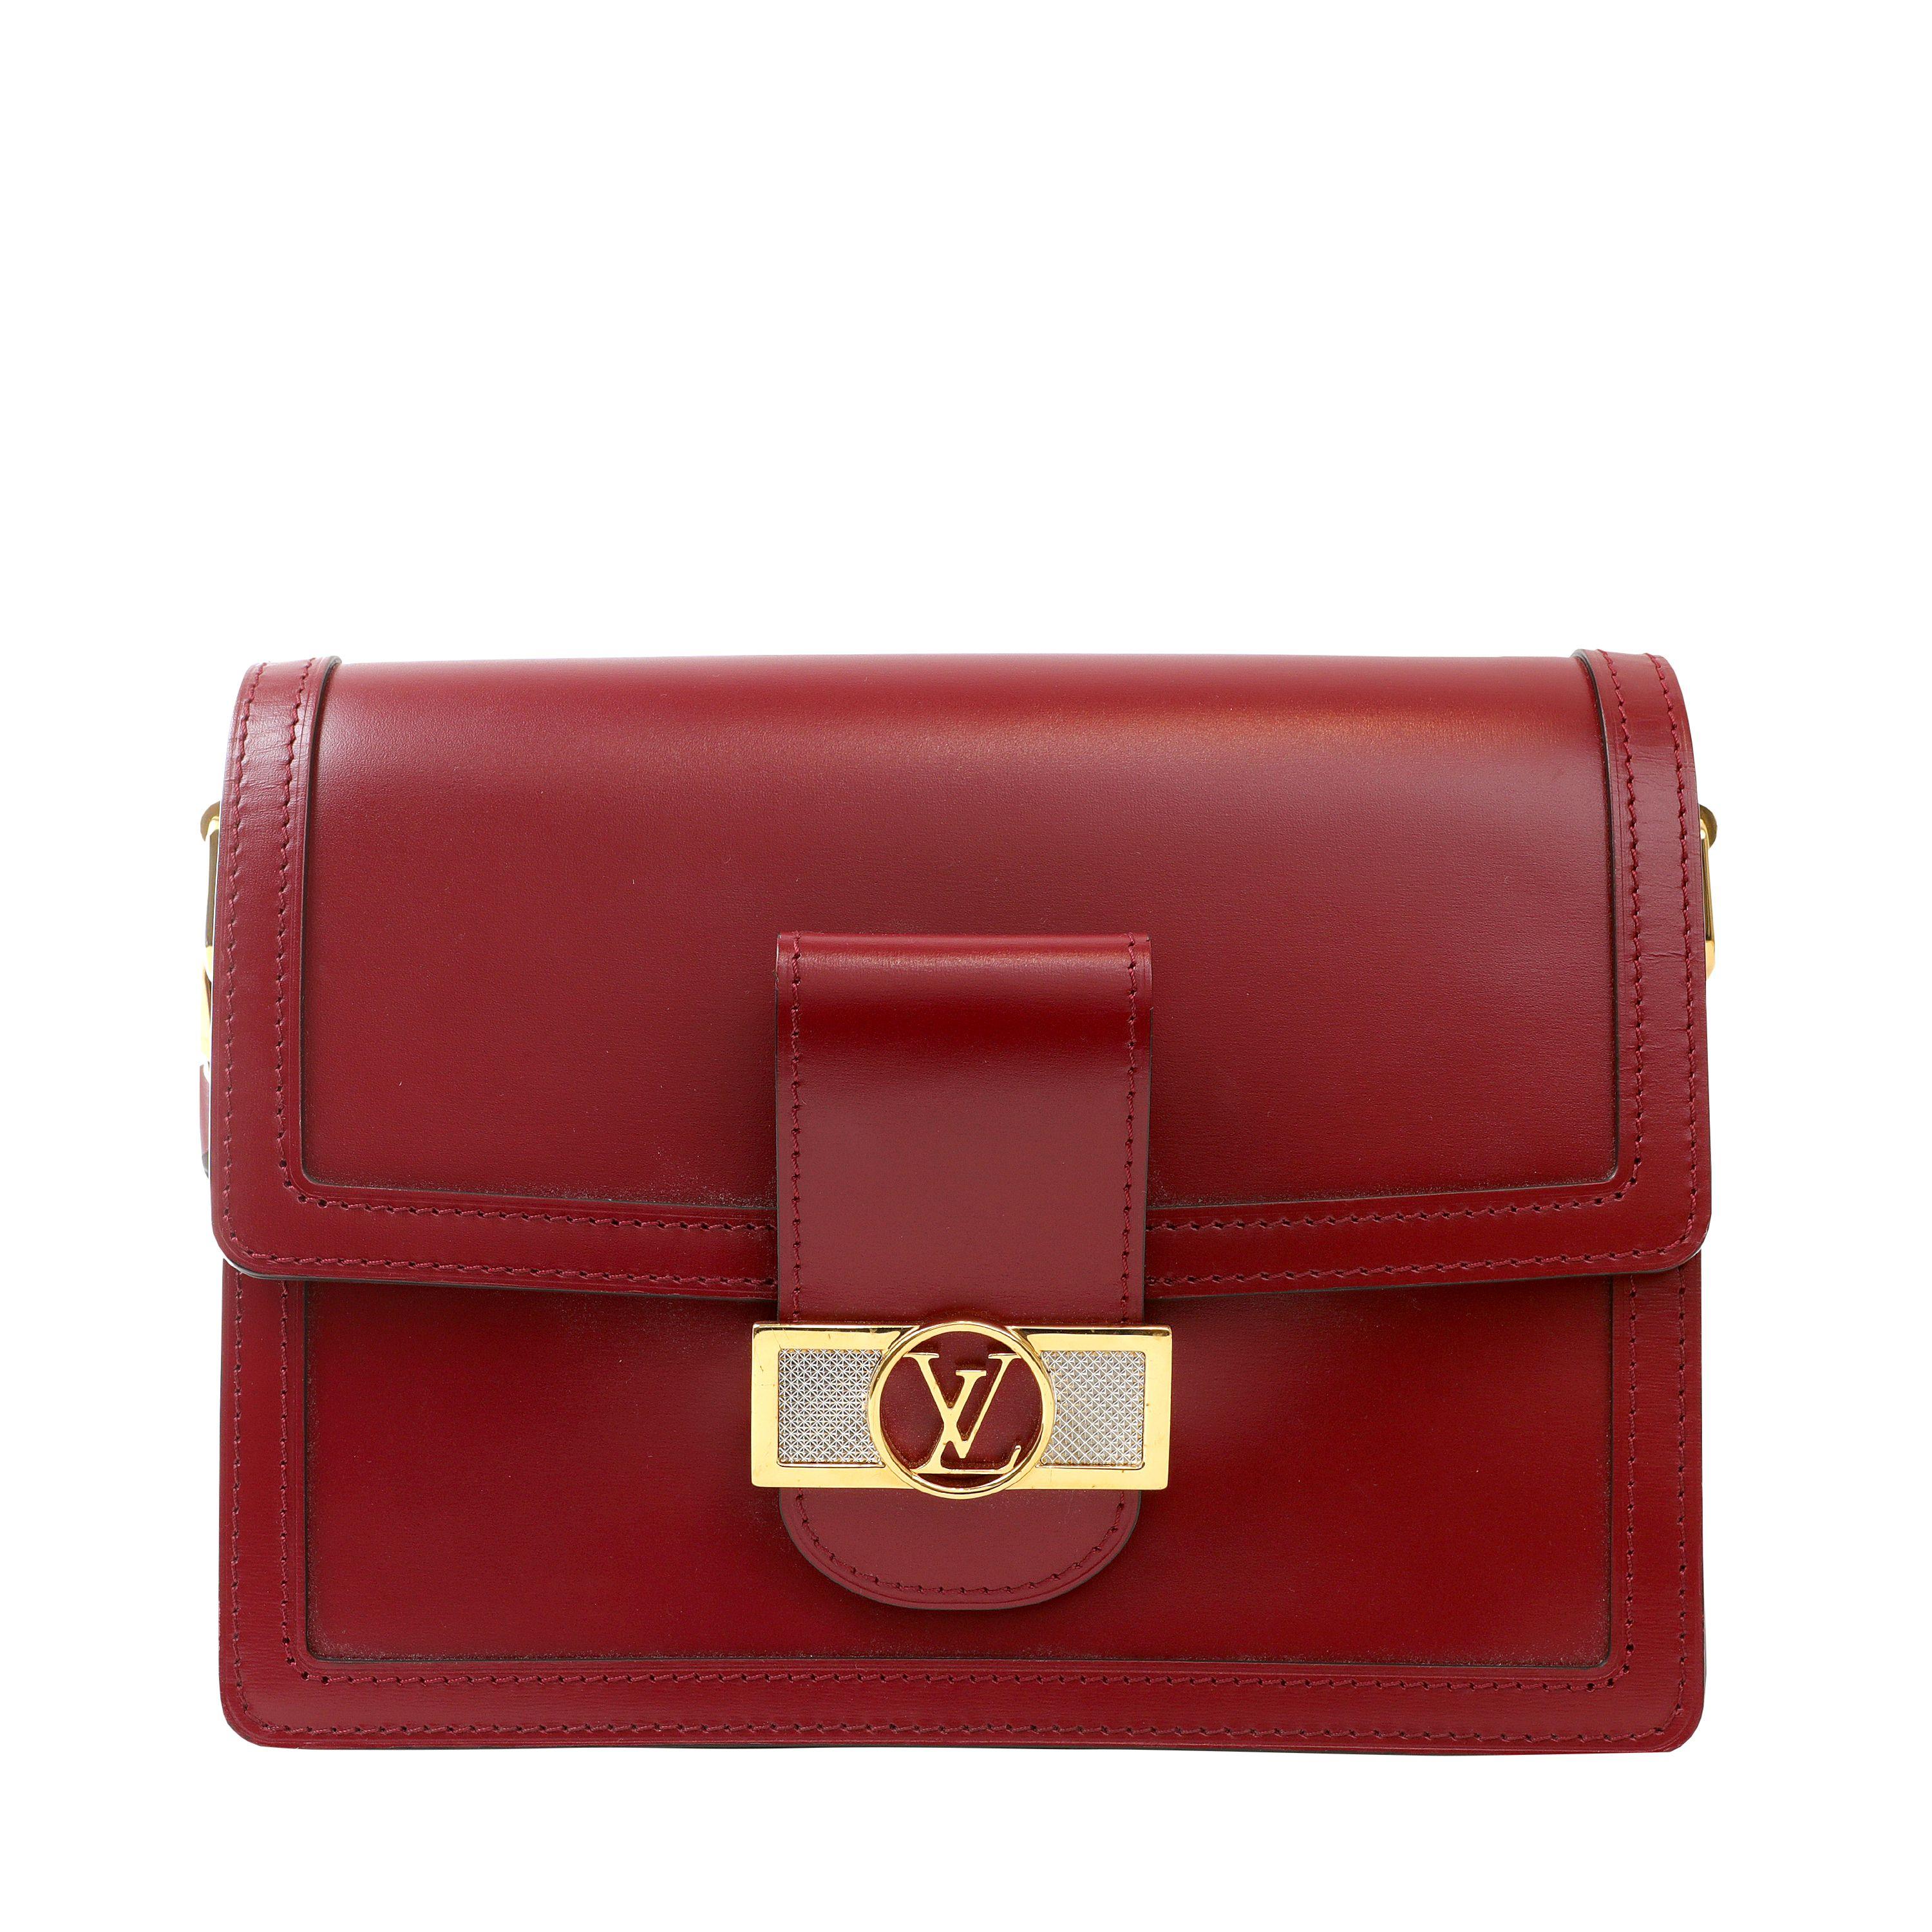 Louis Vuitton Red Calfskin Dauphine Shoulder Bag with Gold Hardware In Good Condition For Sale In Palm Beach, FL